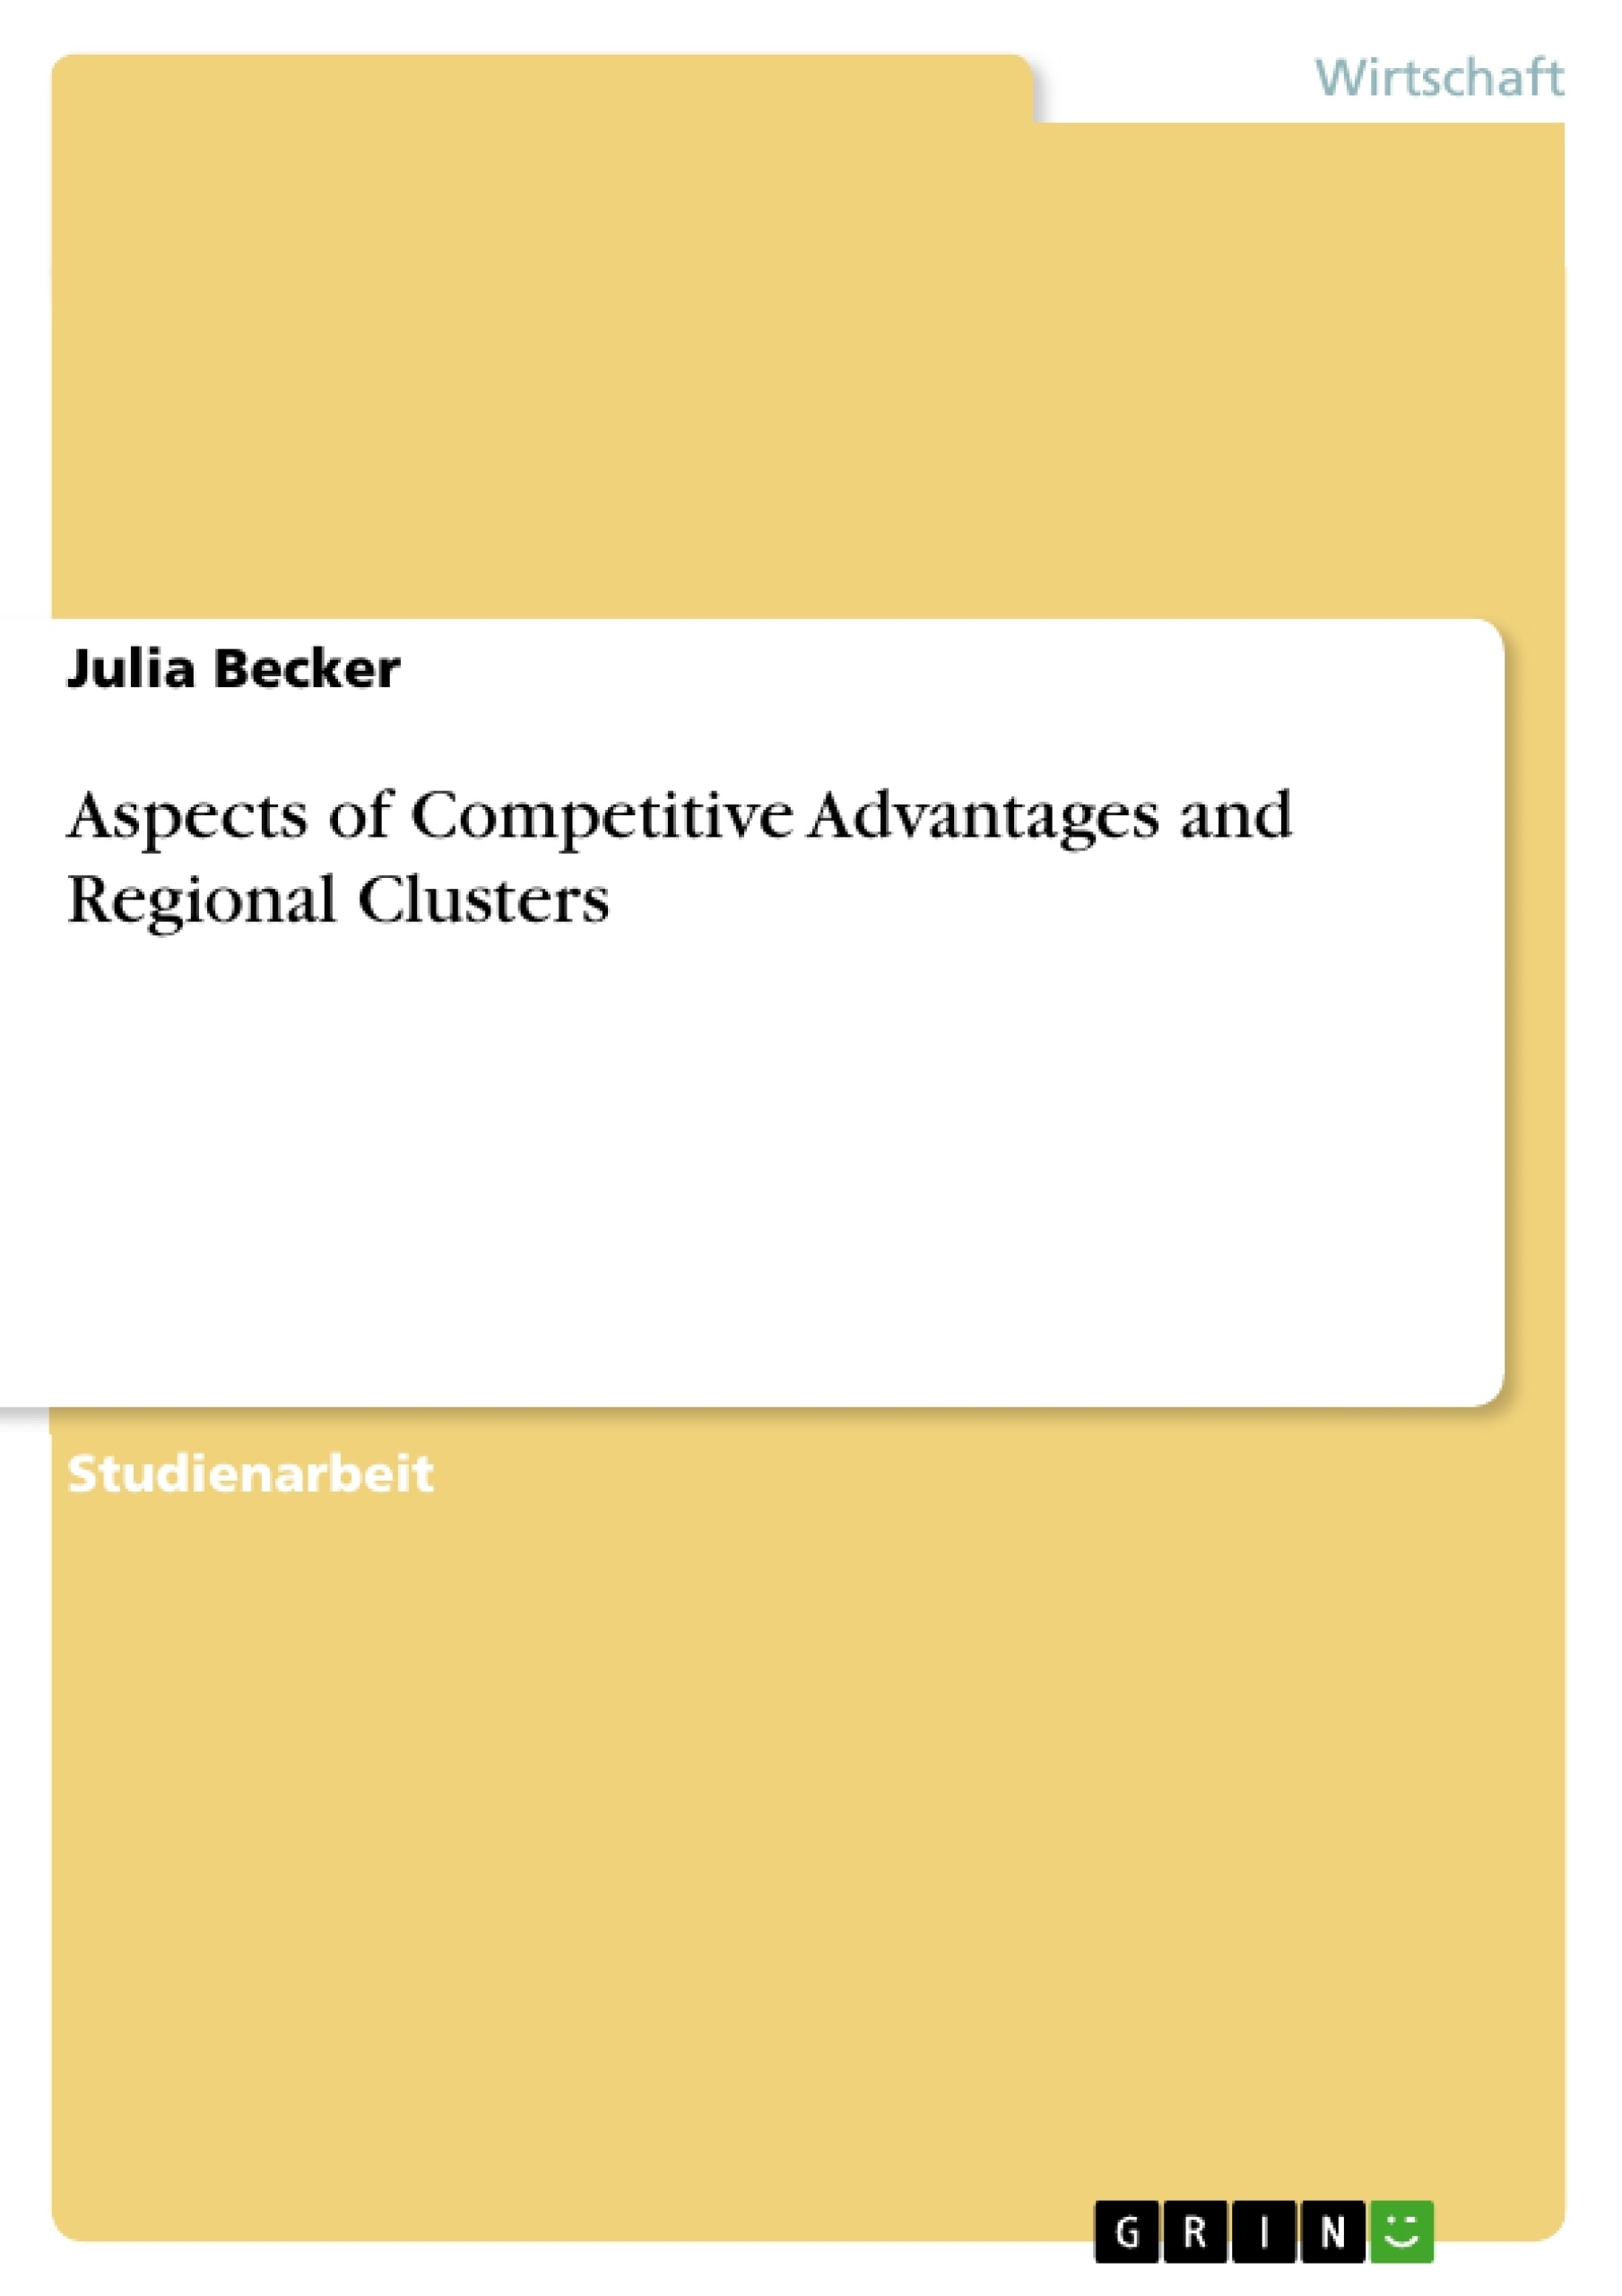 Titel: Aspects of Competitive Advantages and Regional Clusters